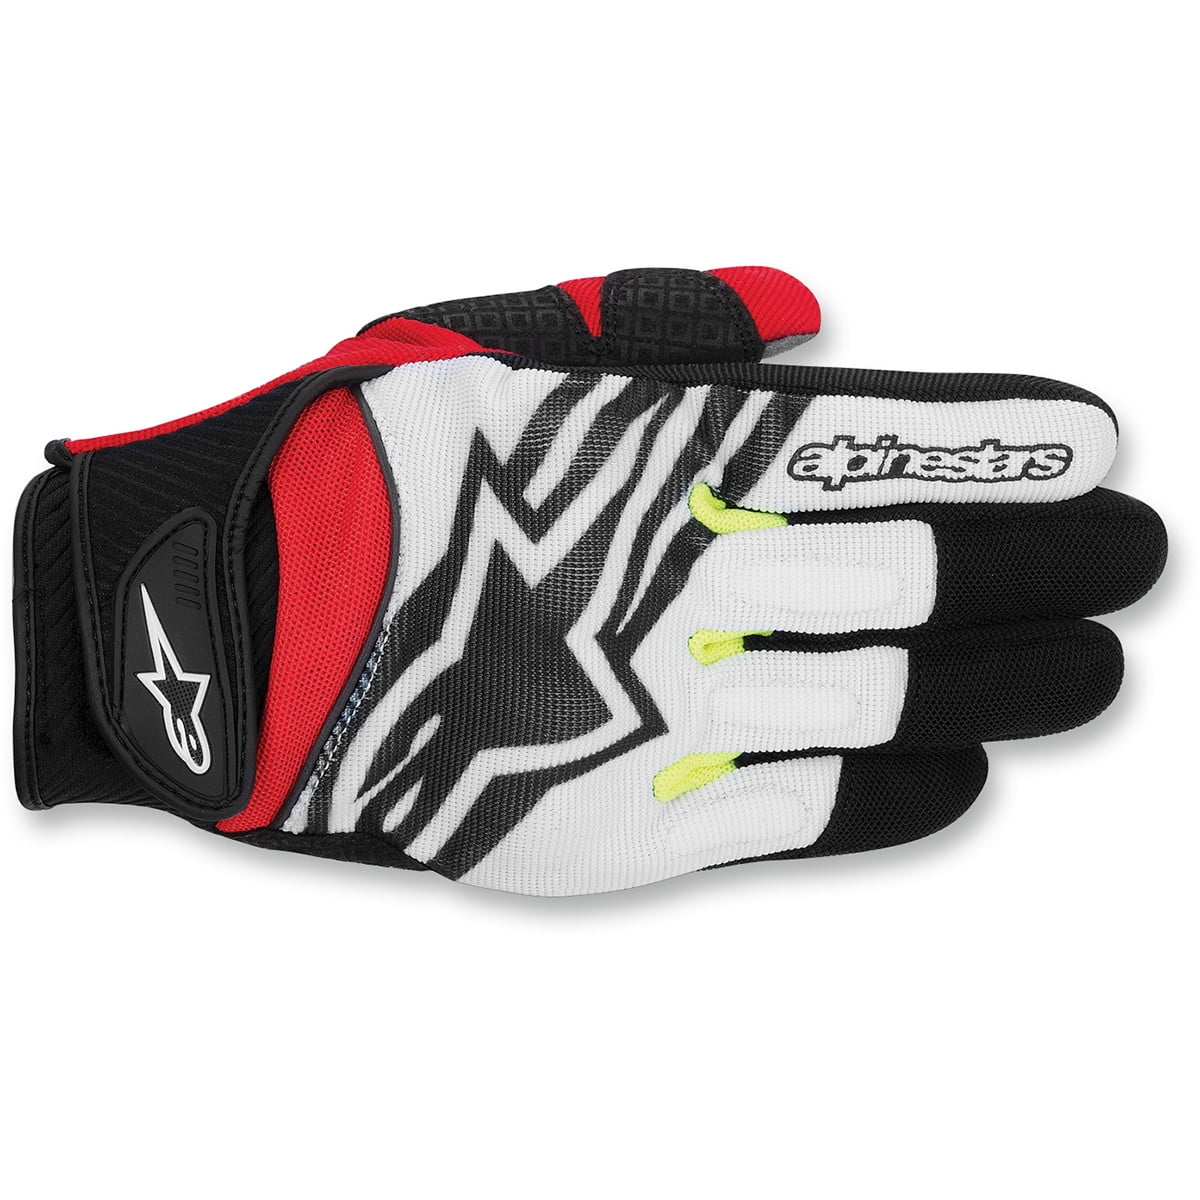 NEW ALPINESTARS SPARTAN BLACK/RED/WHITE MOTORCYCLE GLOVES  ALL SIZE FREE SHIP 